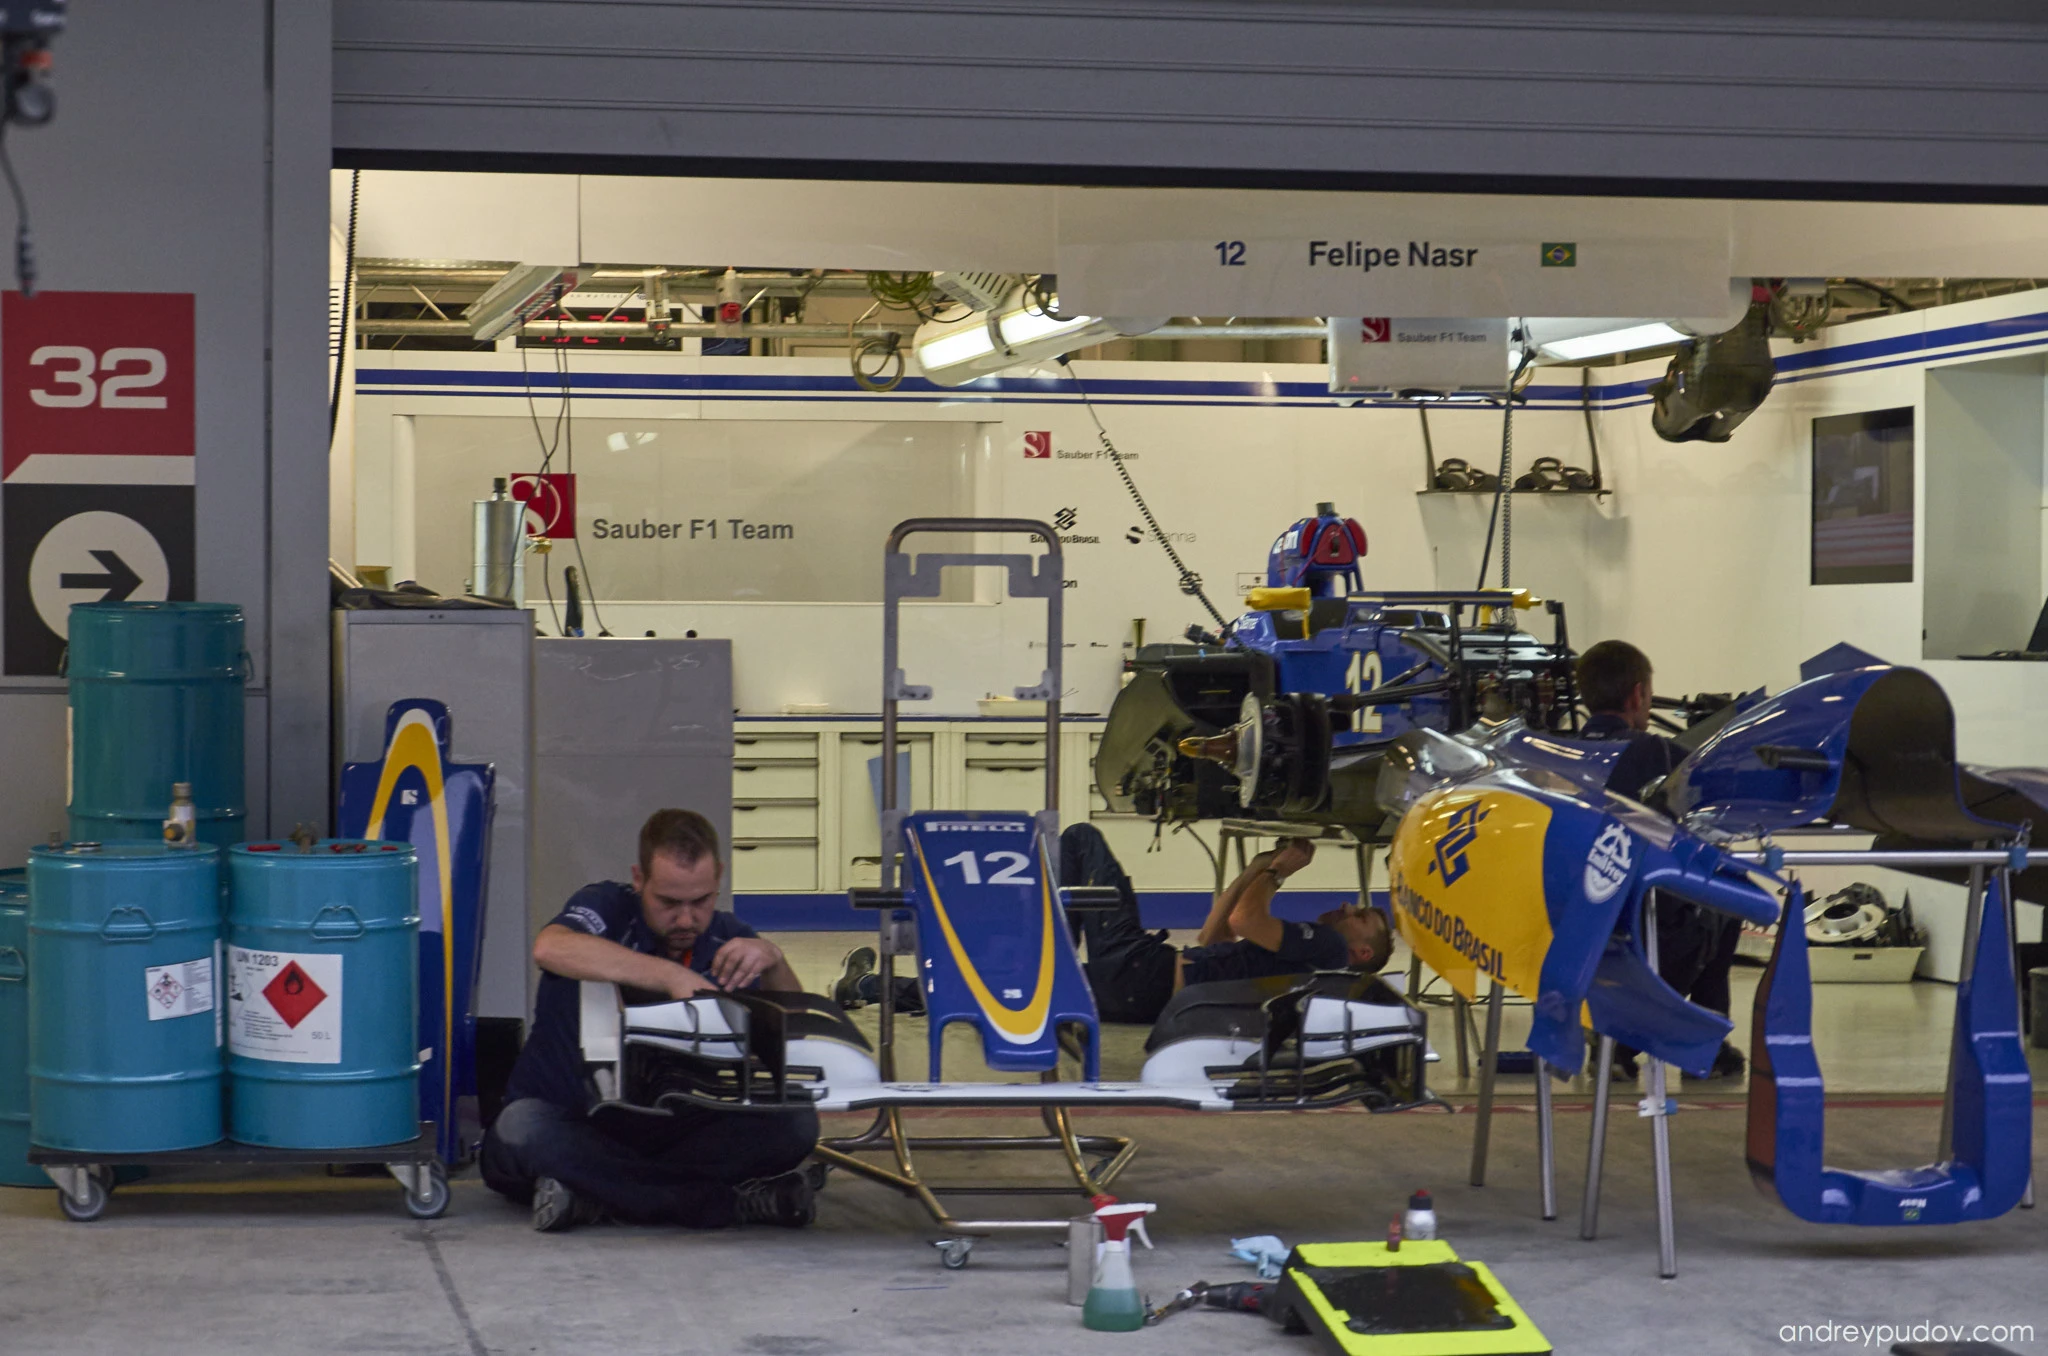 Sauber F1 Team mechanics are hard at work.

The Sauber F1 Team is a Swiss Formula One team. Founded in 1970 by Peter Sauber, the team entered F1 in 1993 and experienced a moderate amount of success (but no wins) before being sold to BMW after the 2005 season and being renamed BMW Sauber for 2006, winning a race in 2008. After 2009, BMW decided to end its involvement in the sport and sold the team back to Peter Sauber. The team ran as "BMW Sauber" in 2010 (using Ferrari engines) for the TV money, before reverting back to "Sauber" in 2011.